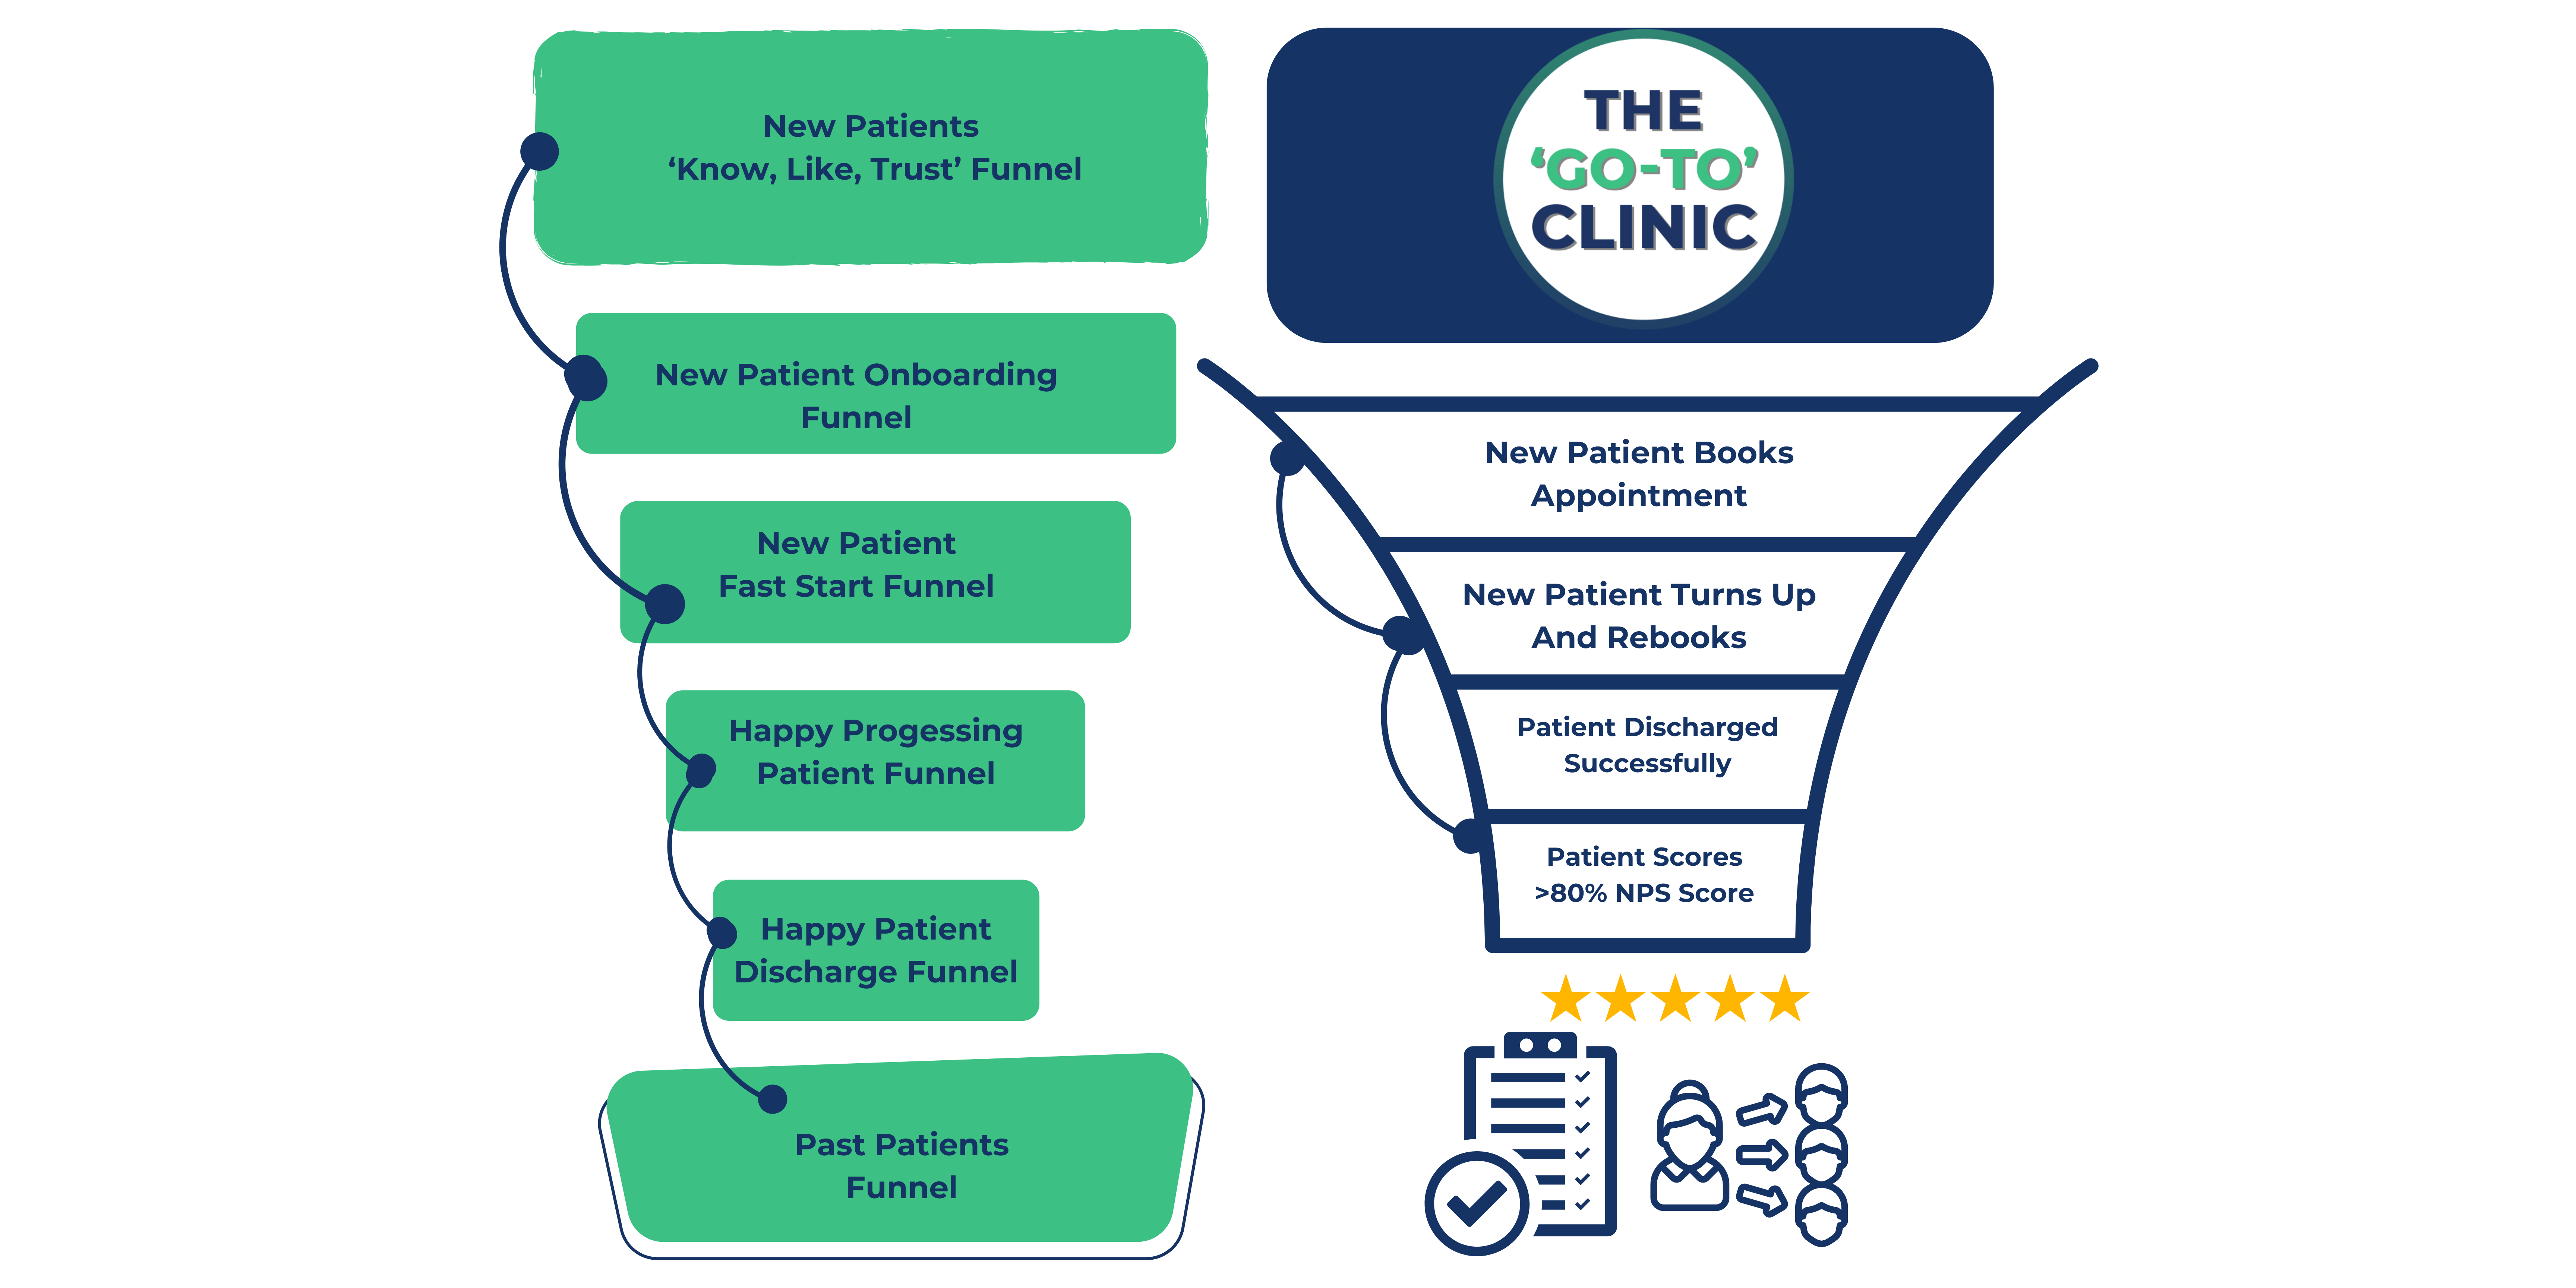 The ‘Go-To’ Method showing 6 Core Business Operating Systems That Ensure You Deliver A Consistent World Class Patient Experience That Earns Reviews, Referrals And Lifelong Raving Fans